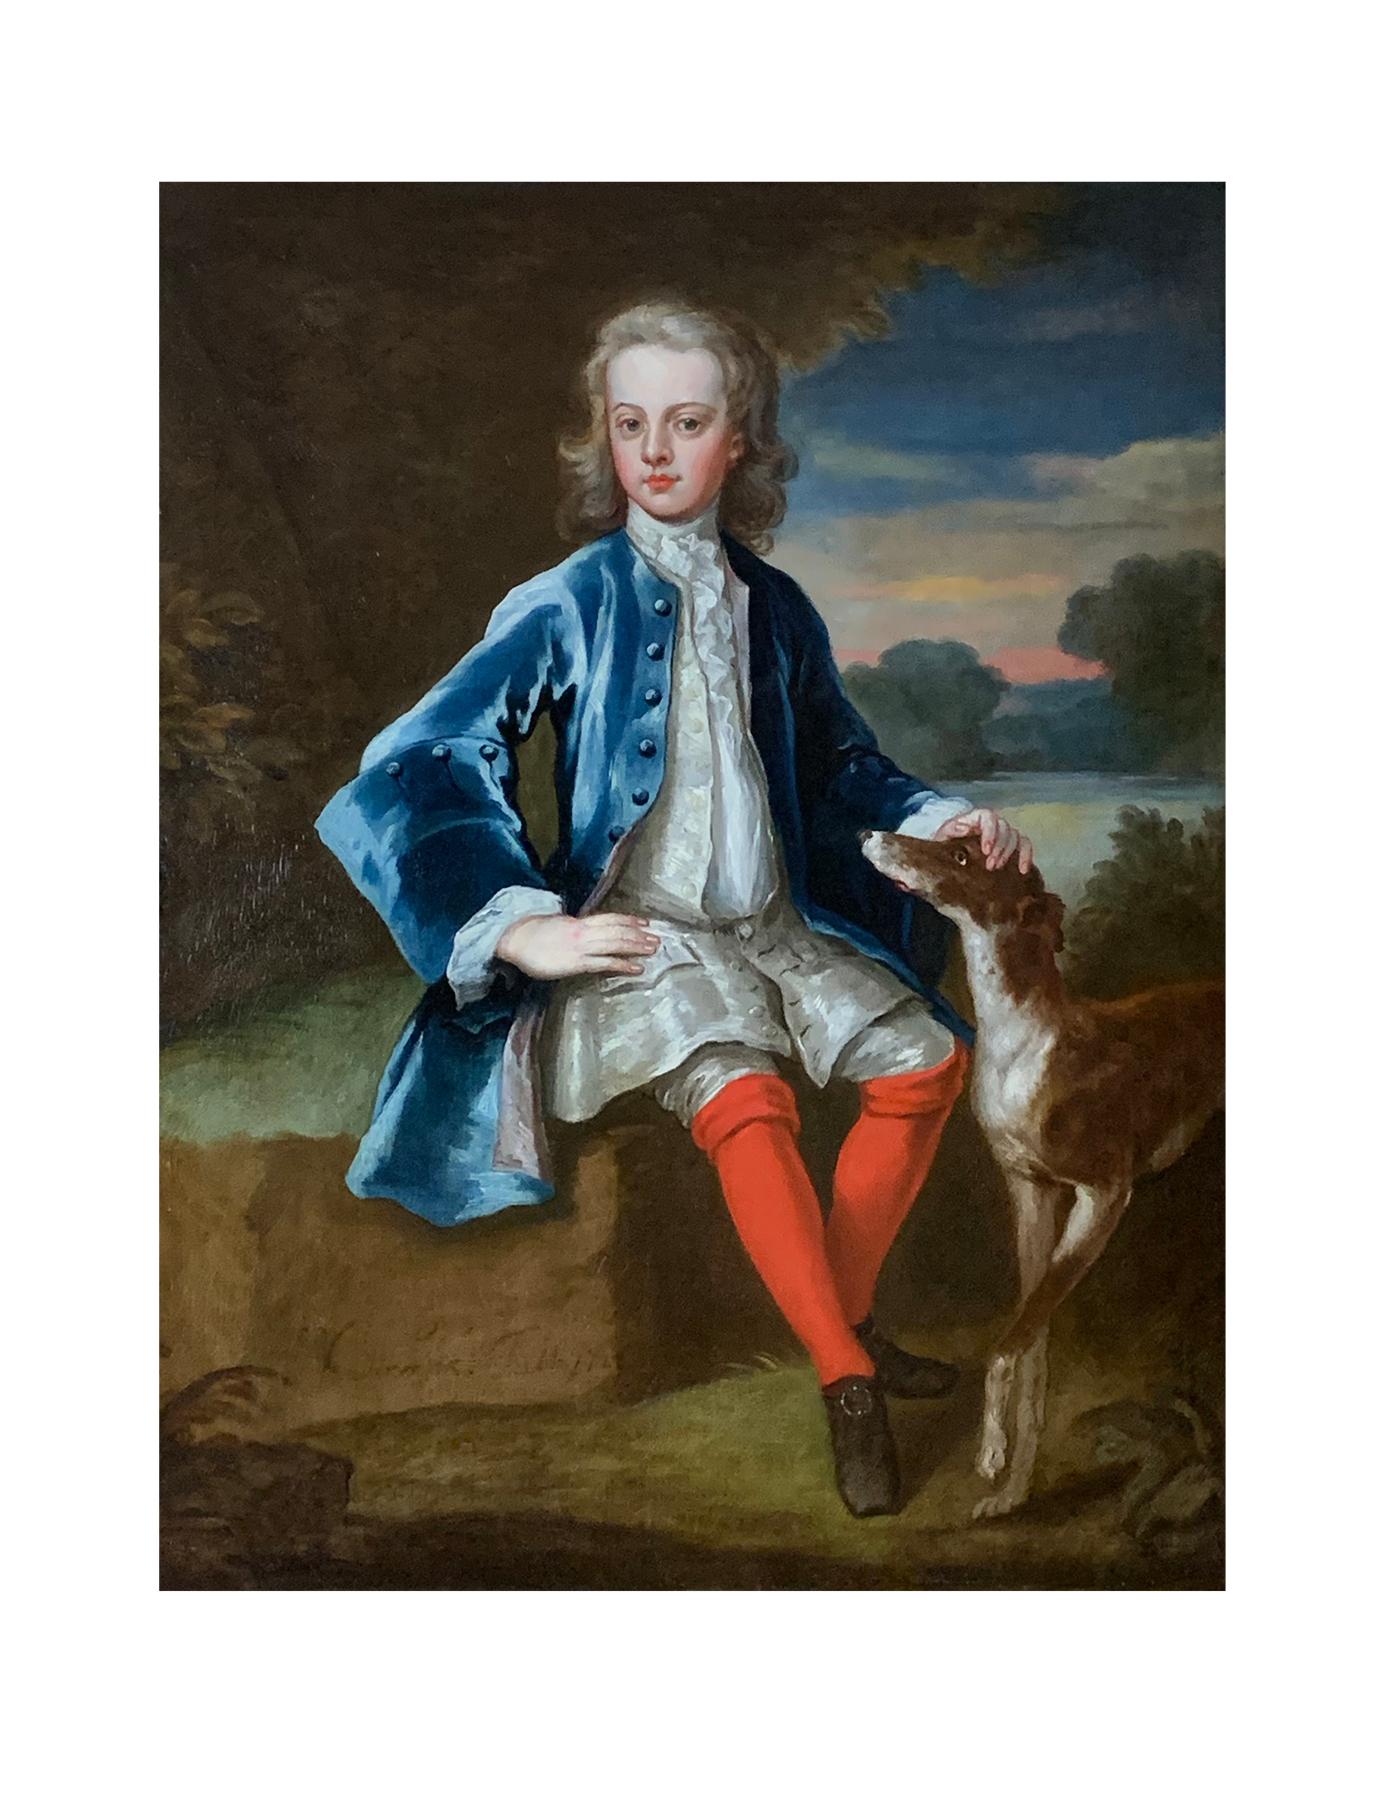 18th Century English Portrait of a Gentleman in a Blue Coat with his Dog - Painting by John Vanderbank